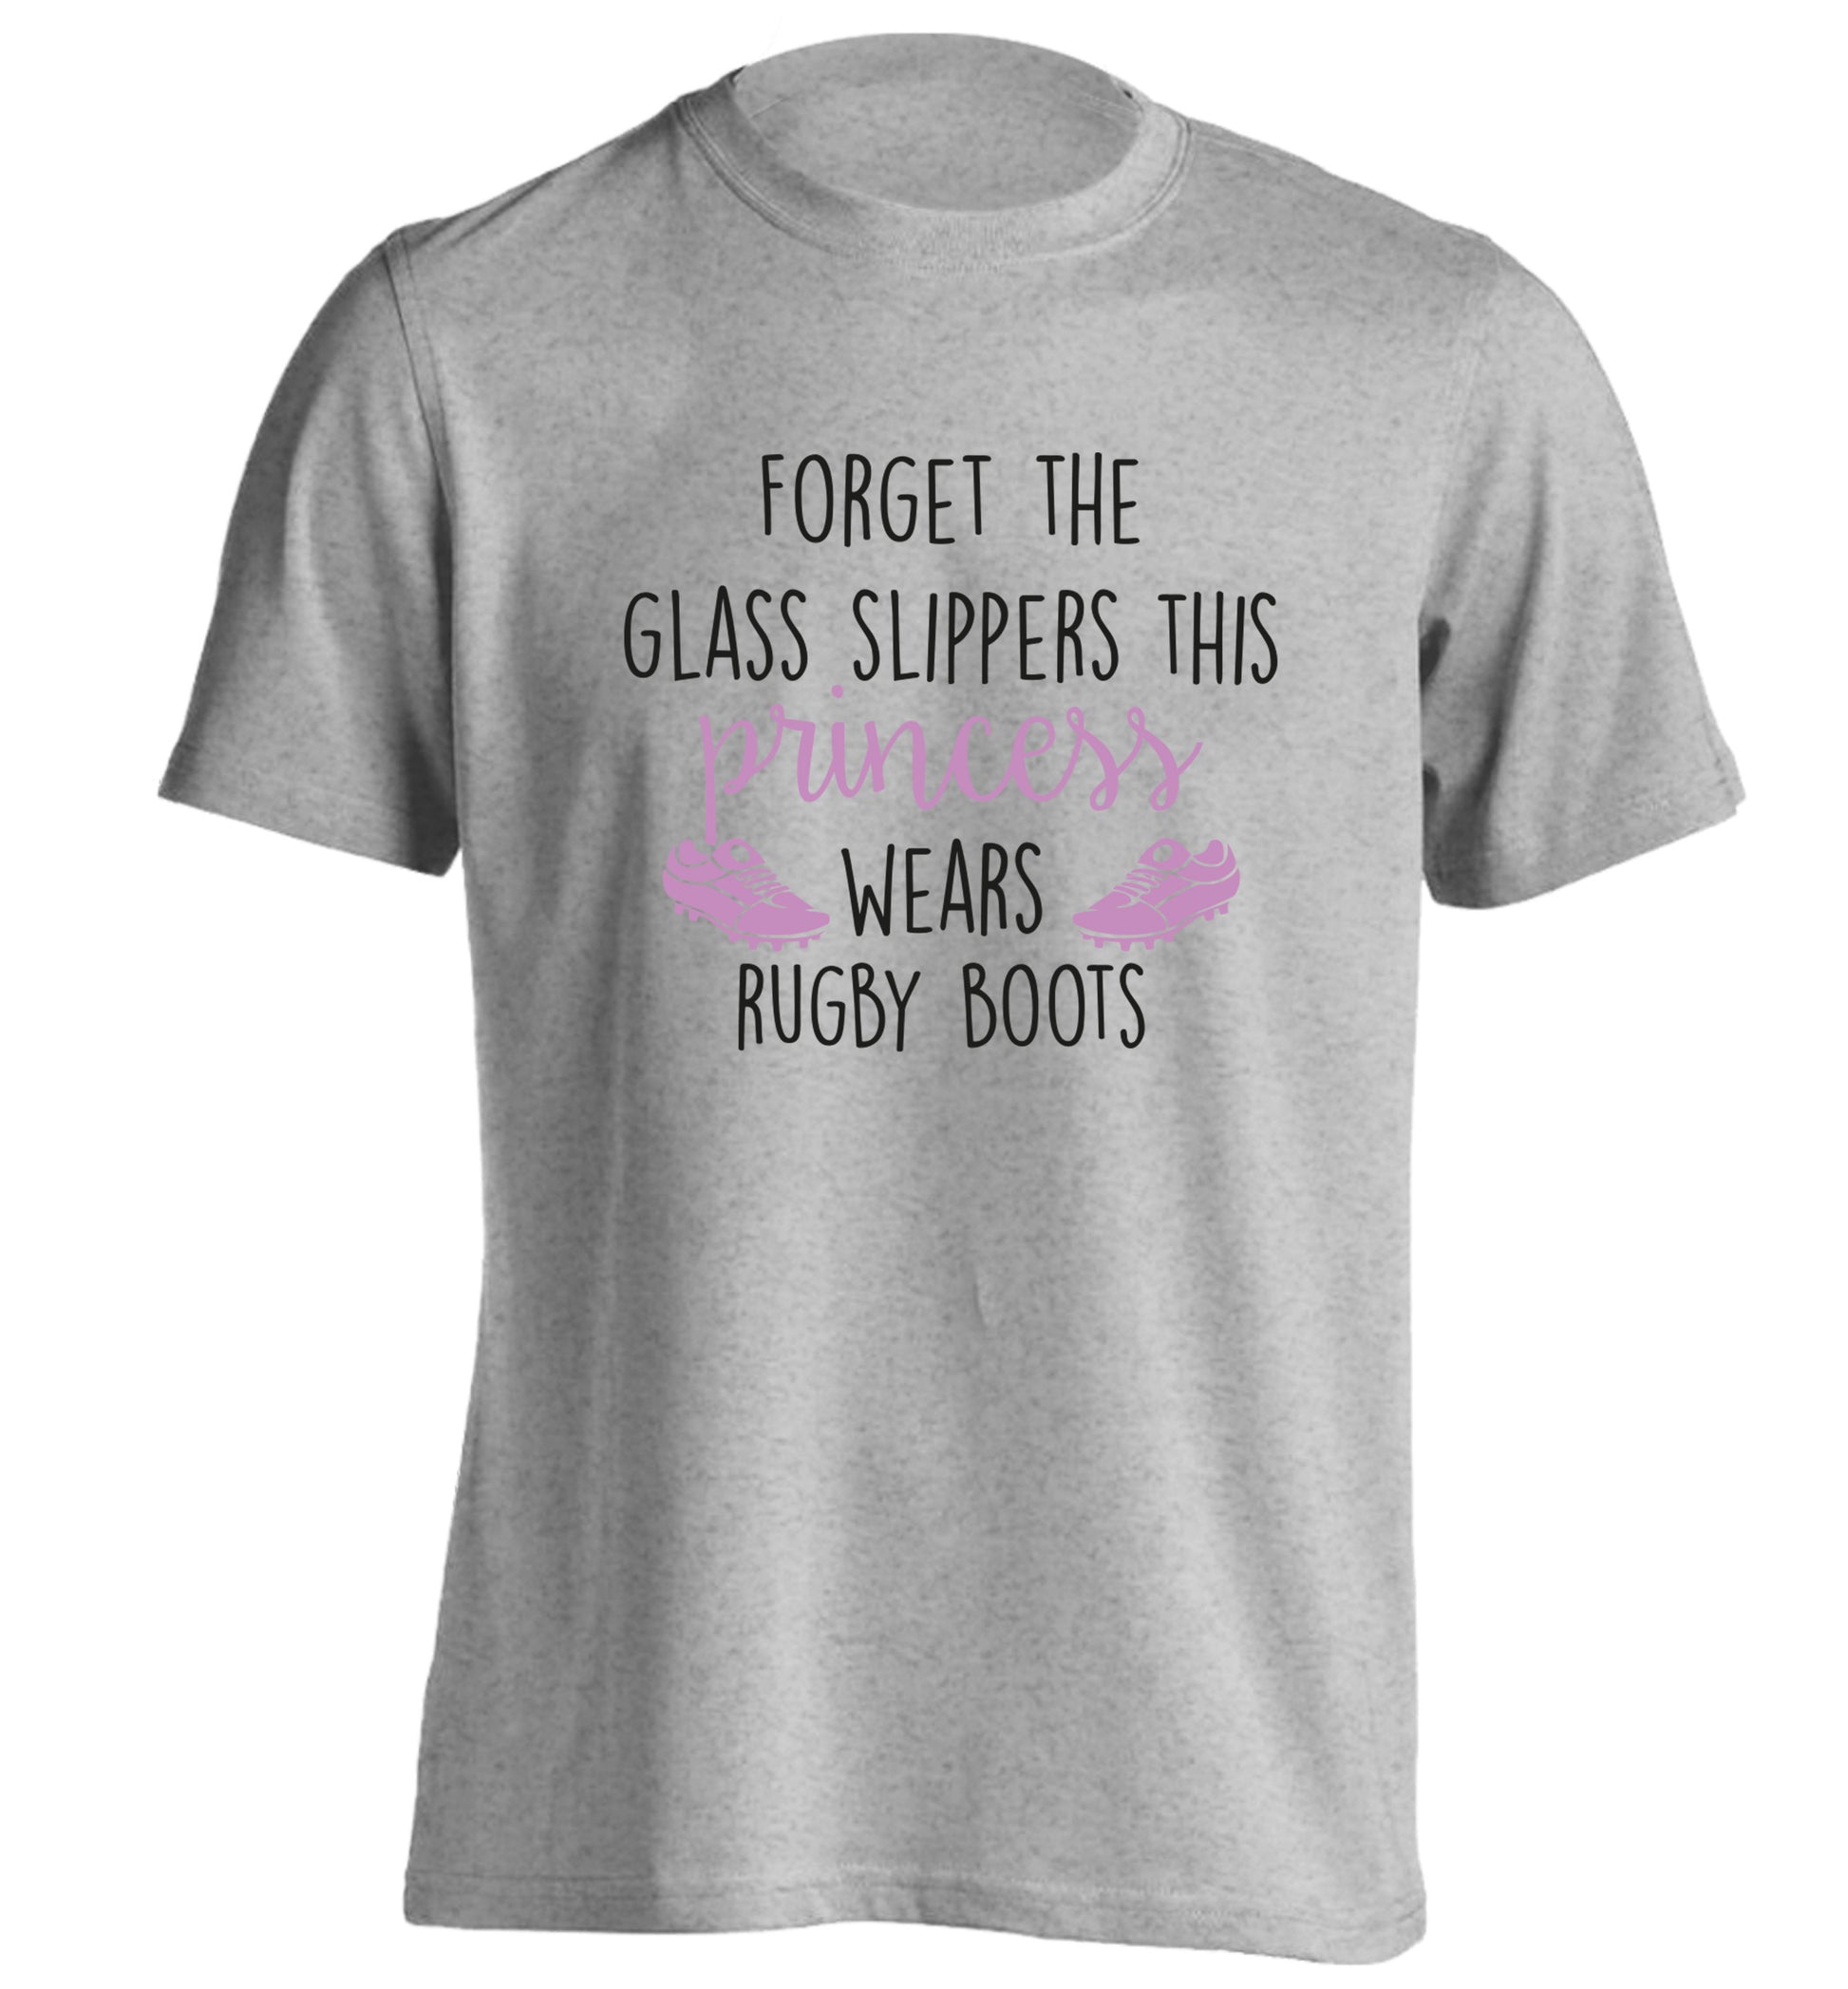 Forget the glass slippers this princess wears rugby boots adults unisex grey Tshirt 2XL